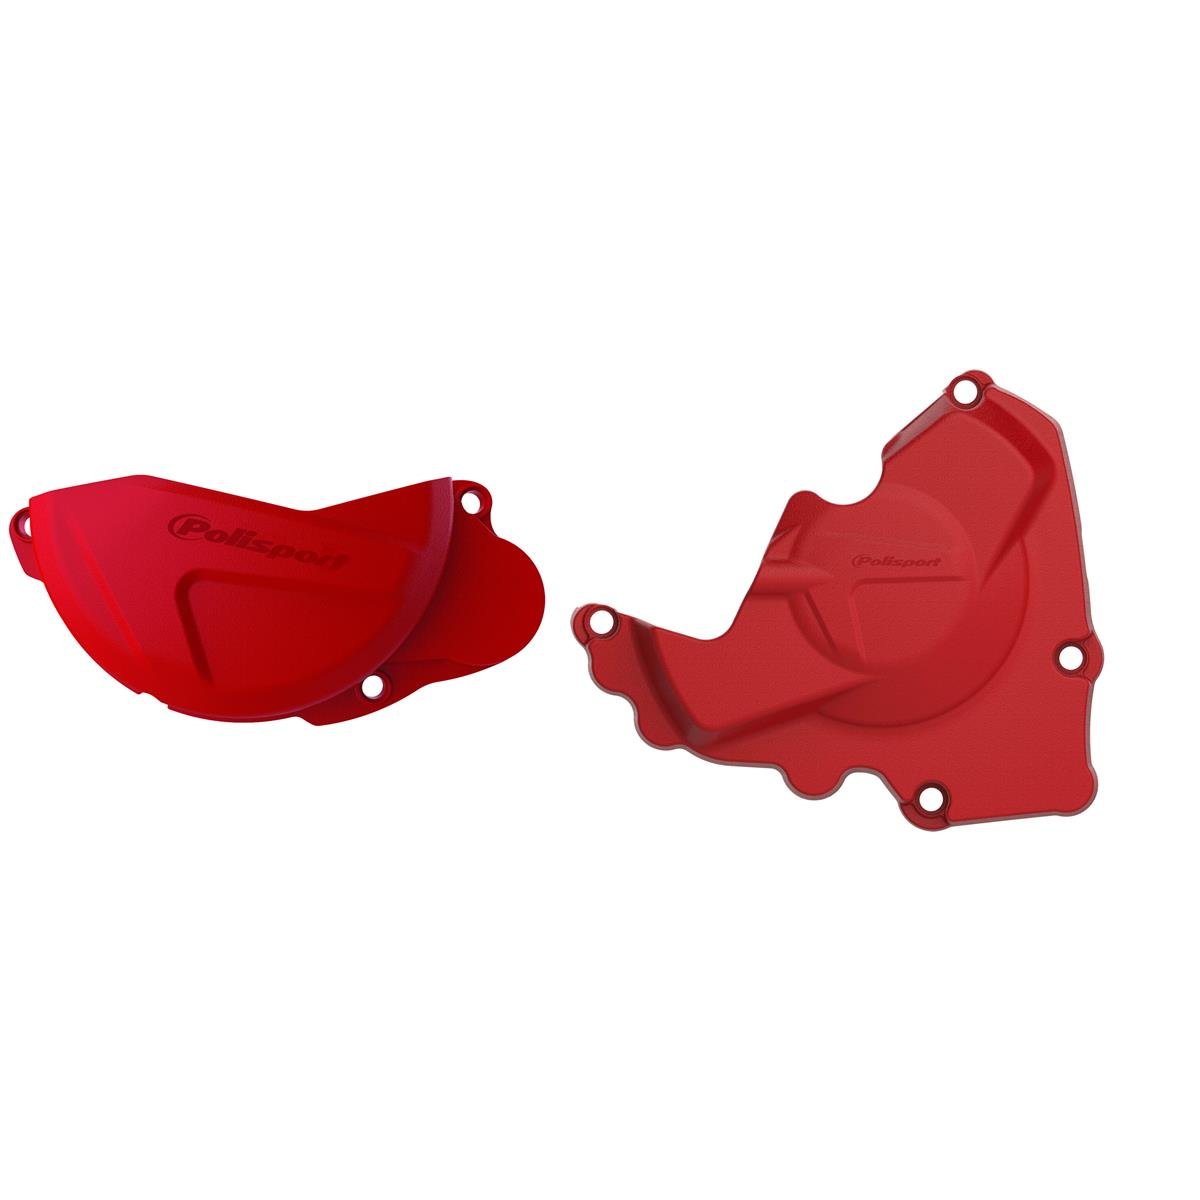 Polisport Clutch/Ignition Cover Protection  Honda CRF 250 10-17, Red